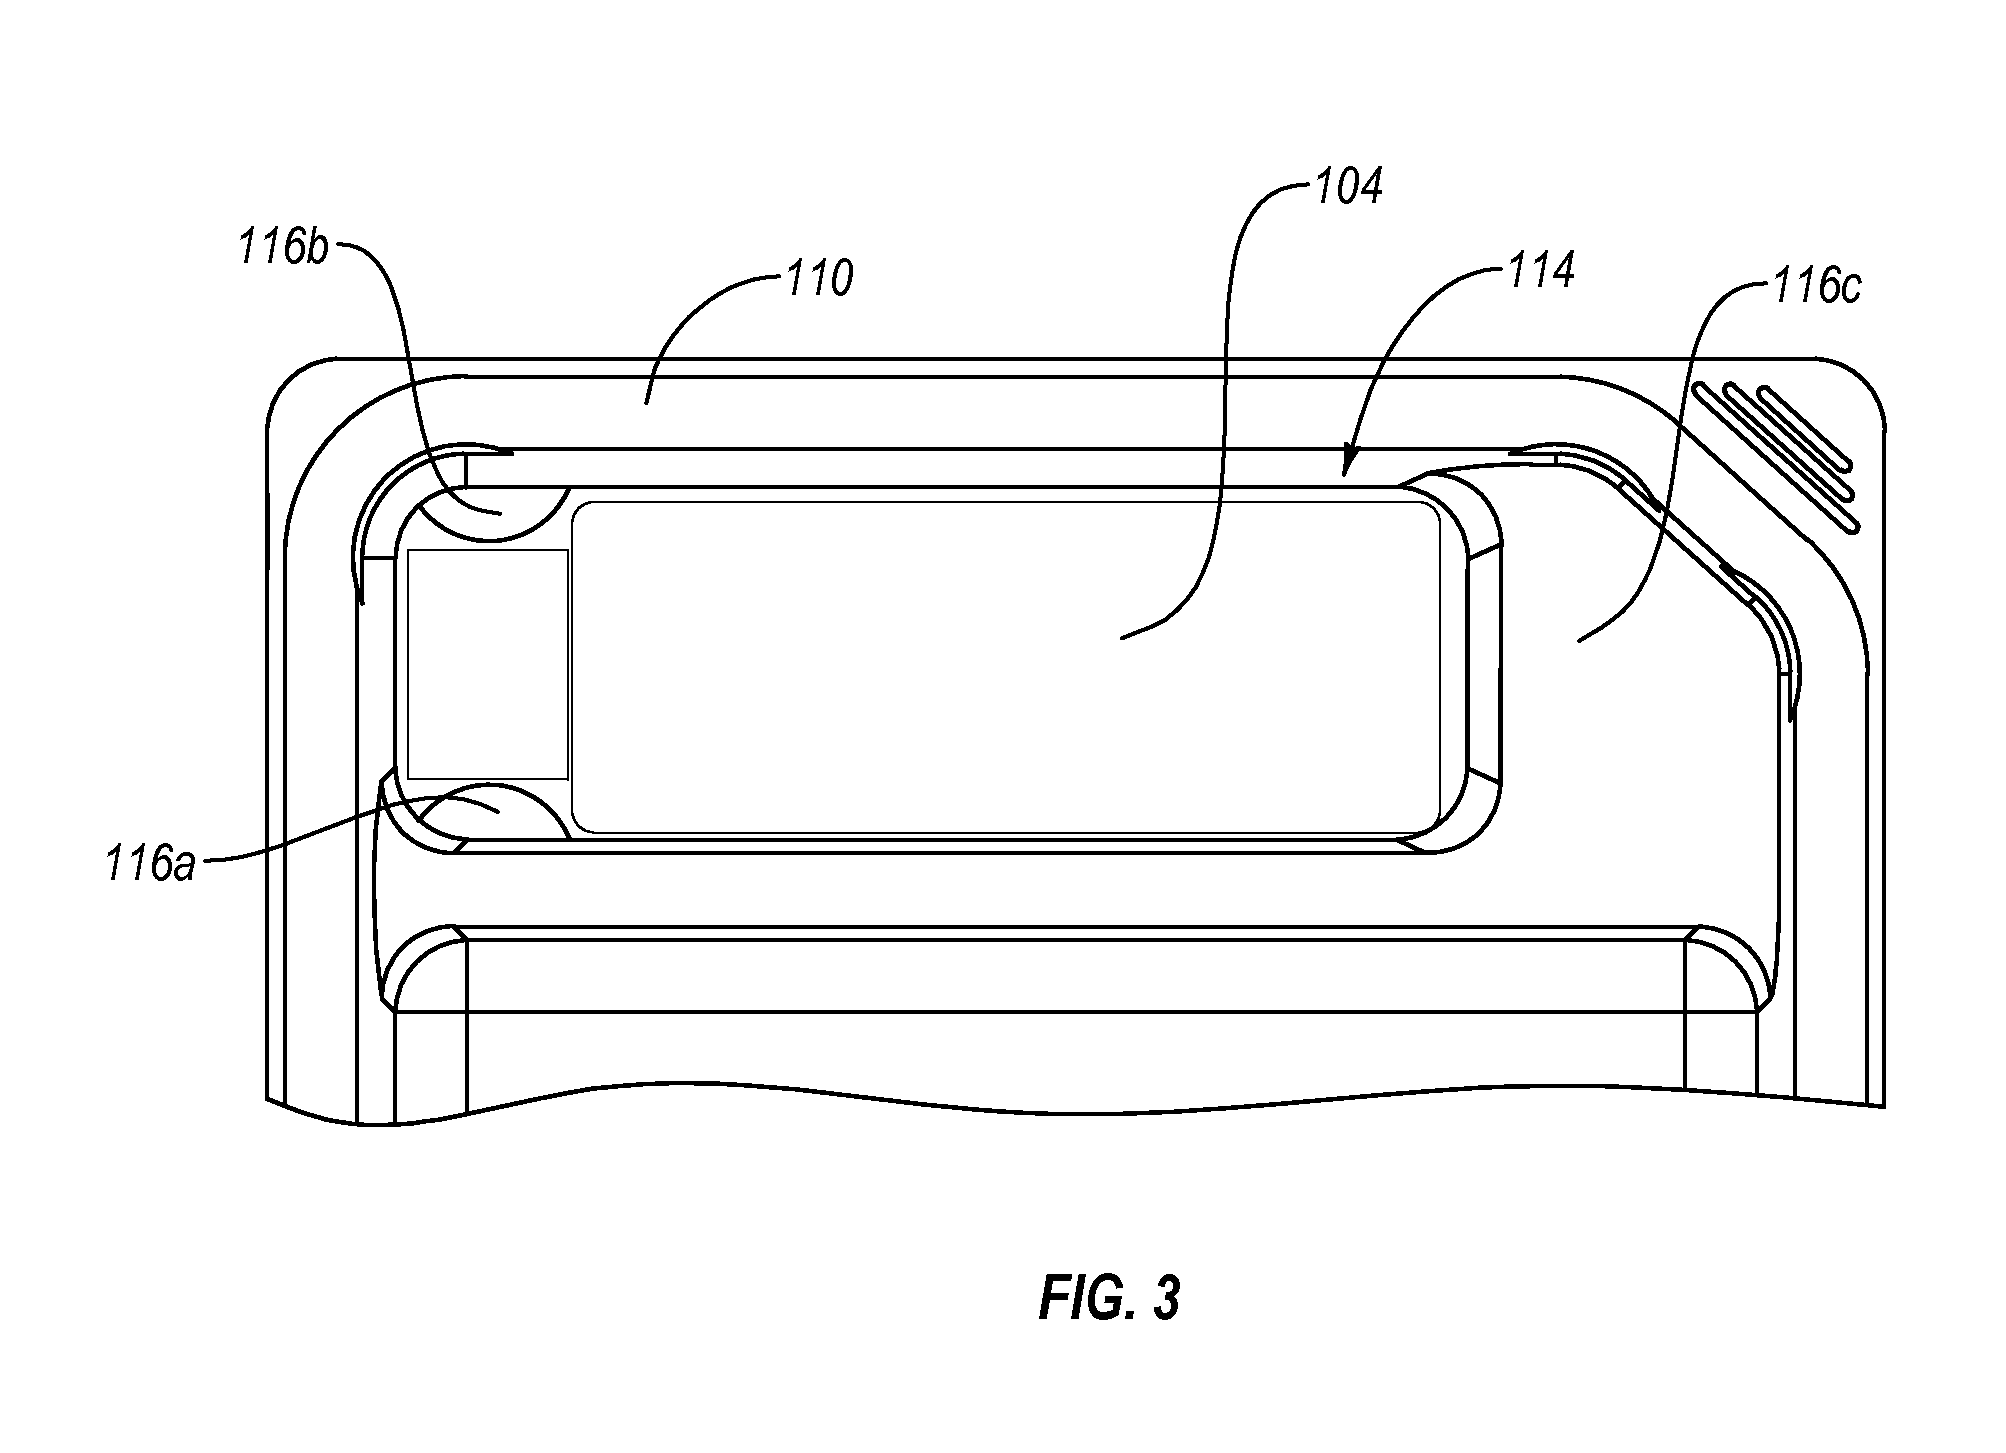 Disinfectant delivery system and method for disinfection